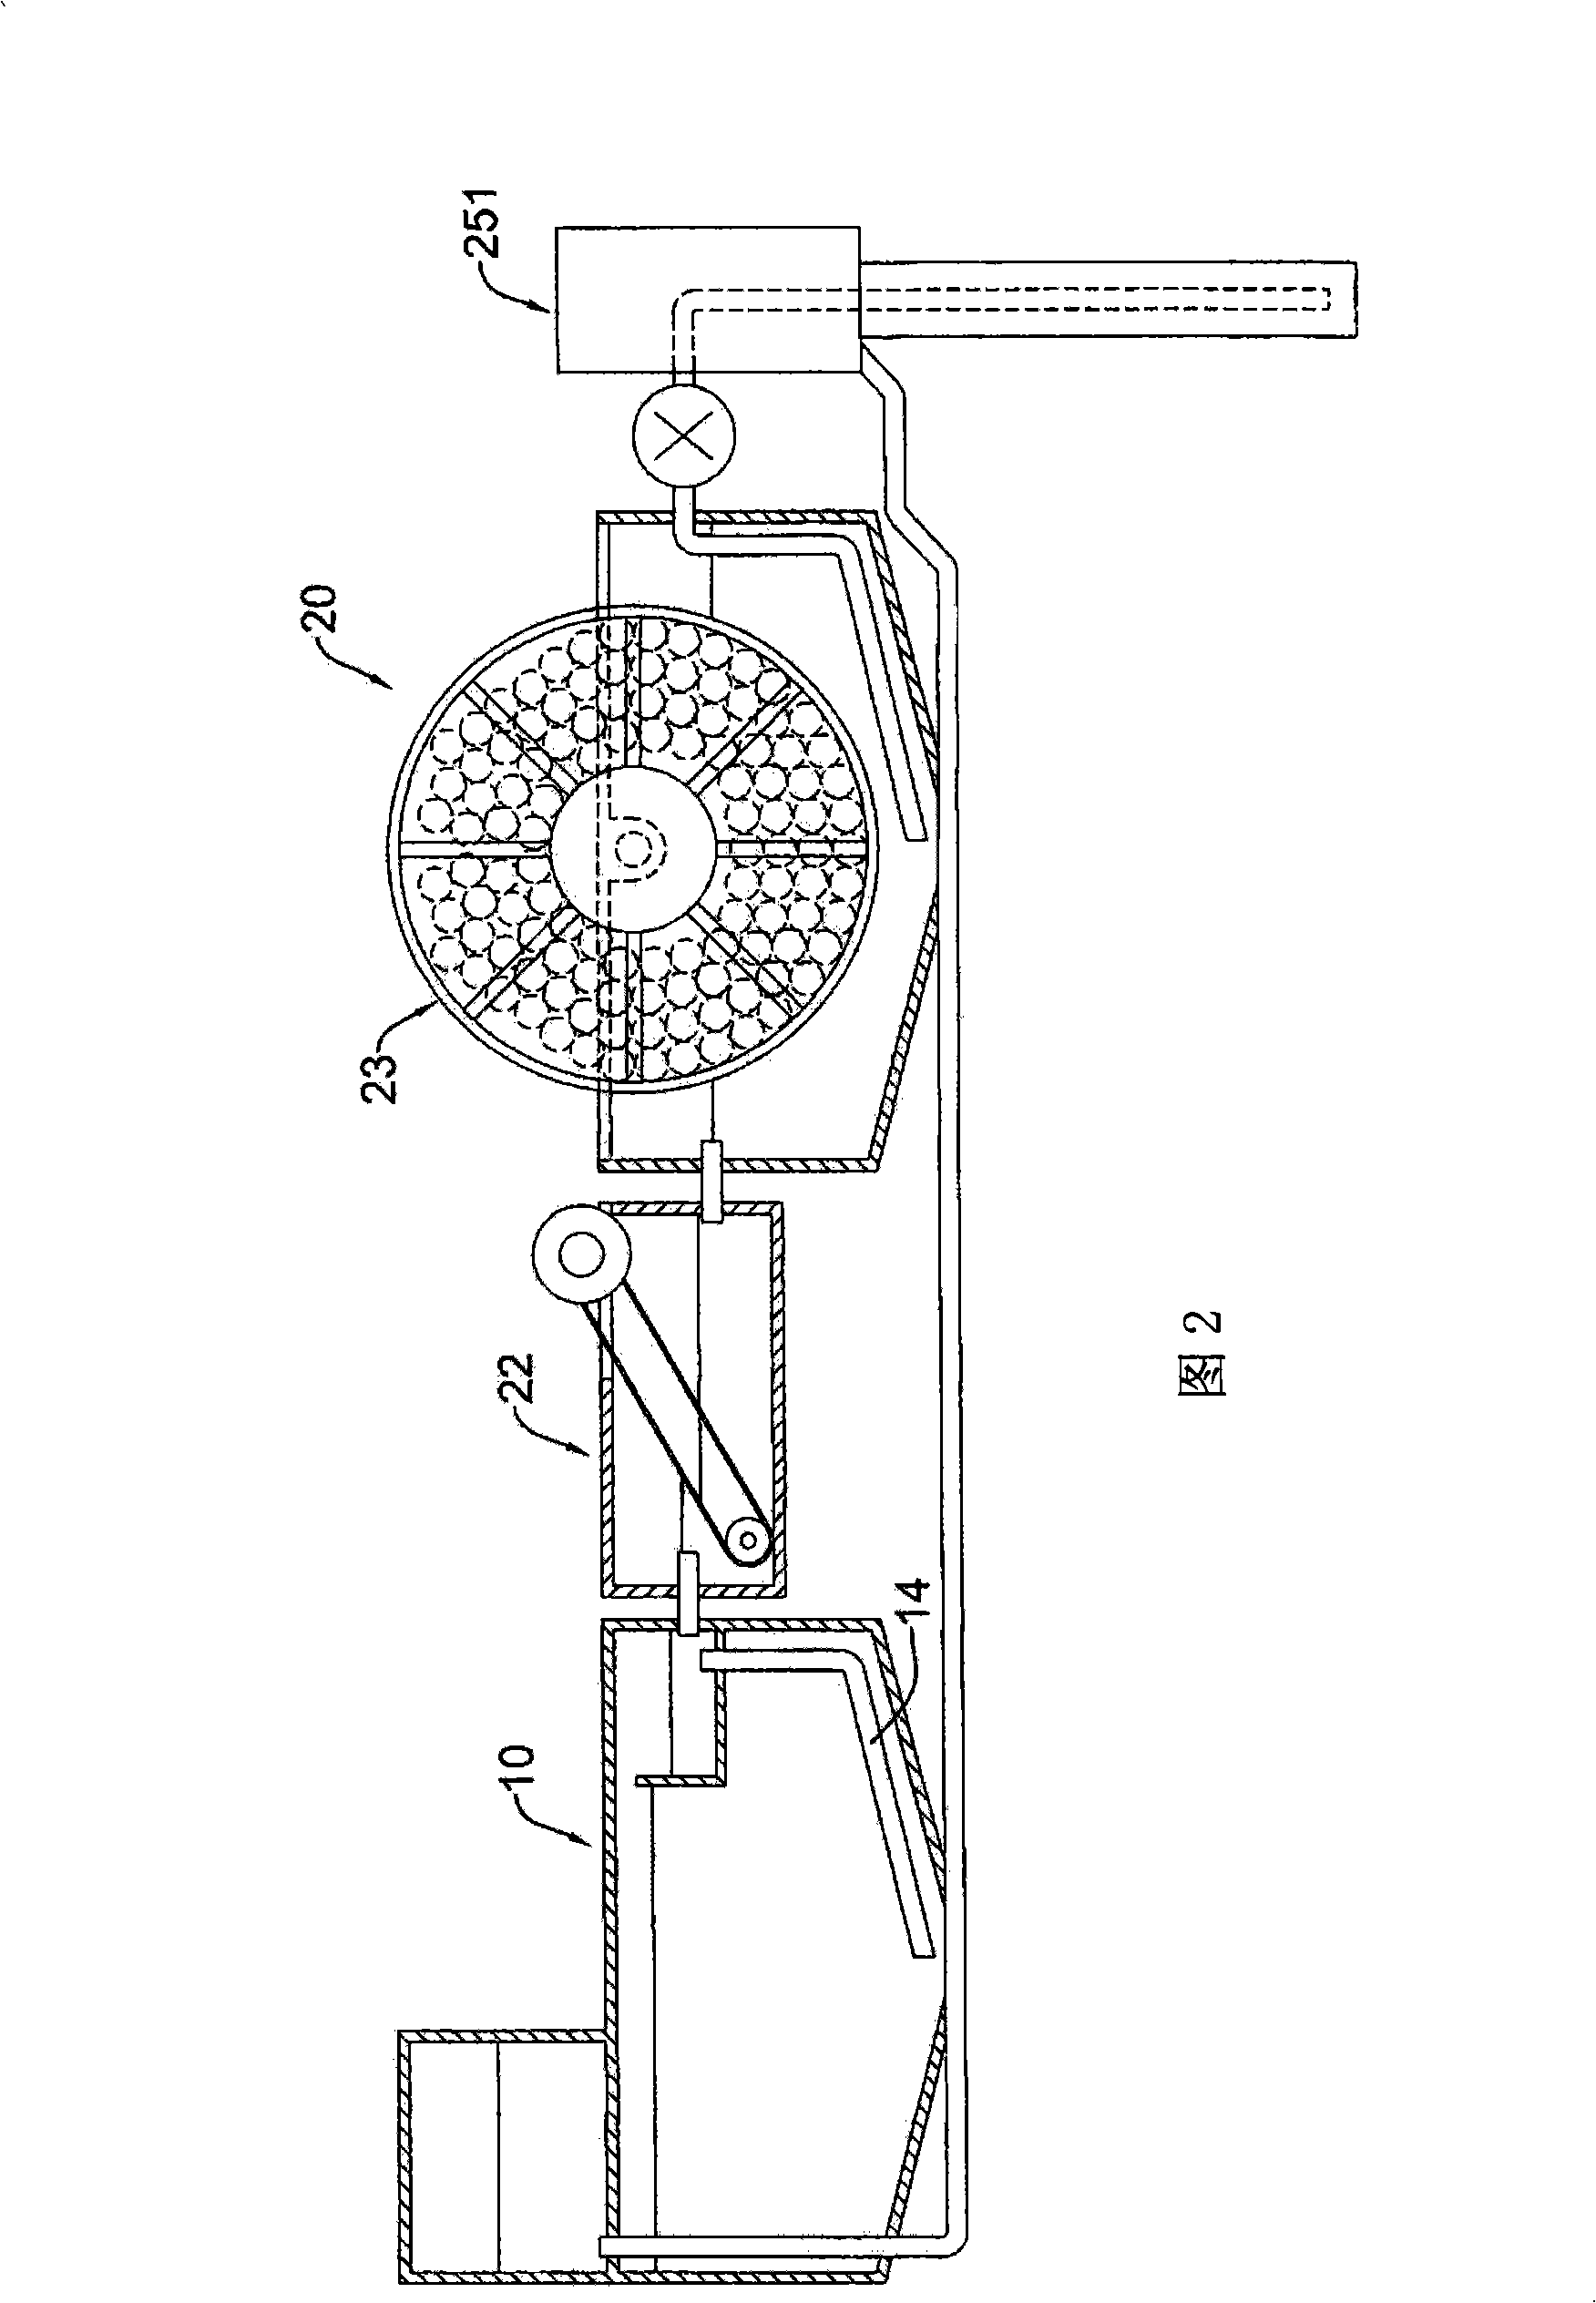 Automatic circulating-water life-supporting and breeding system